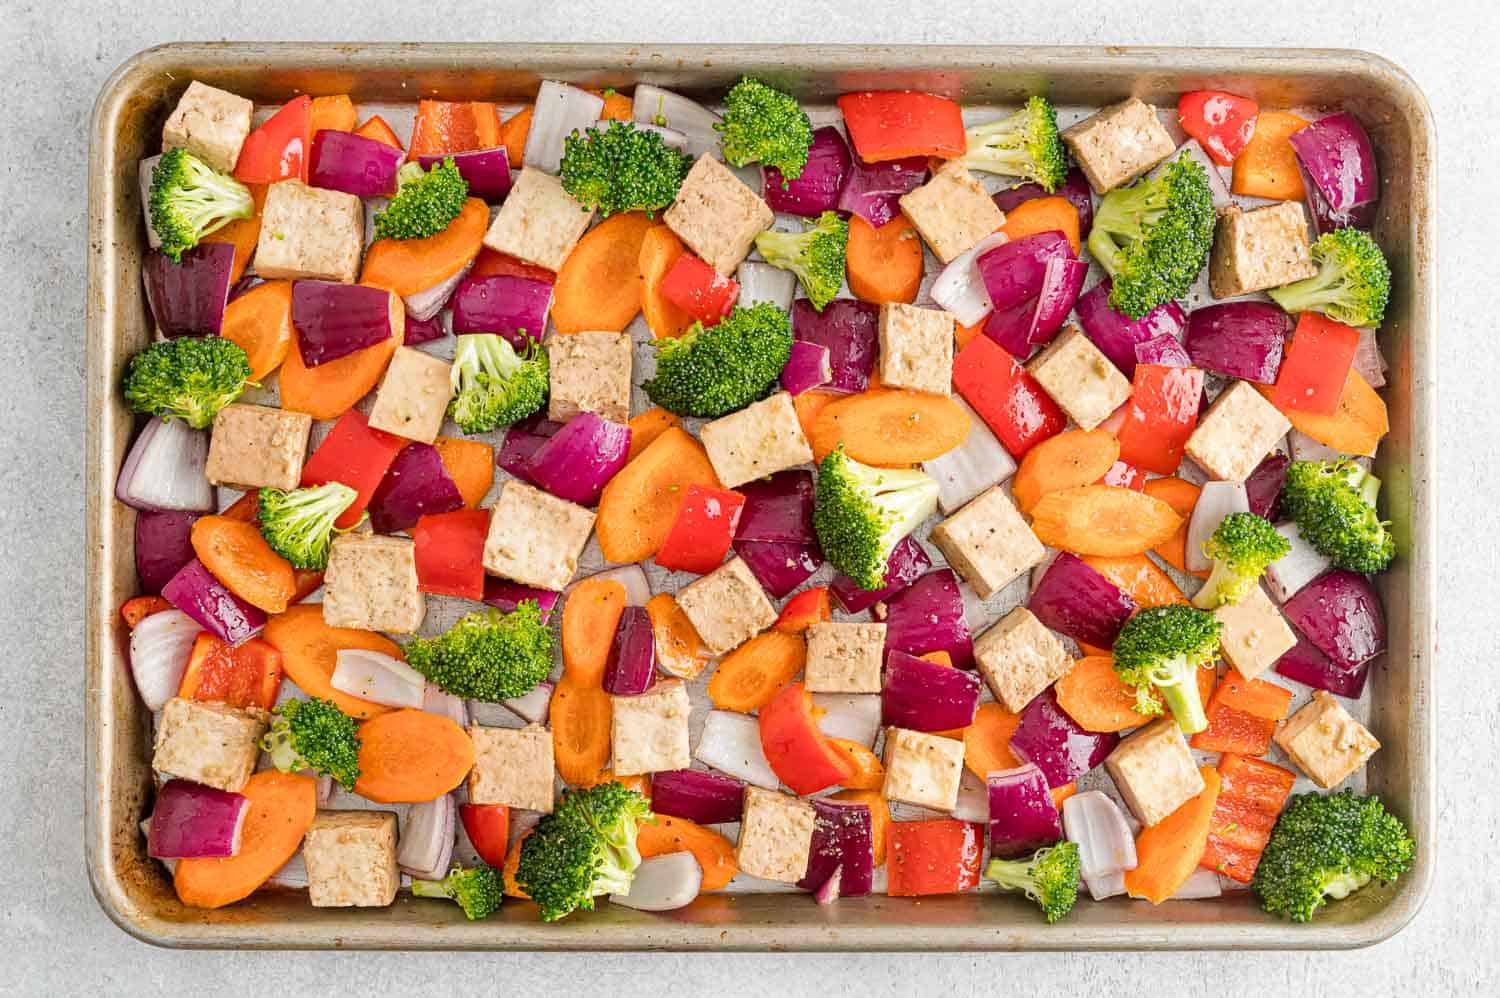 Uncooked tofu and vegetables.